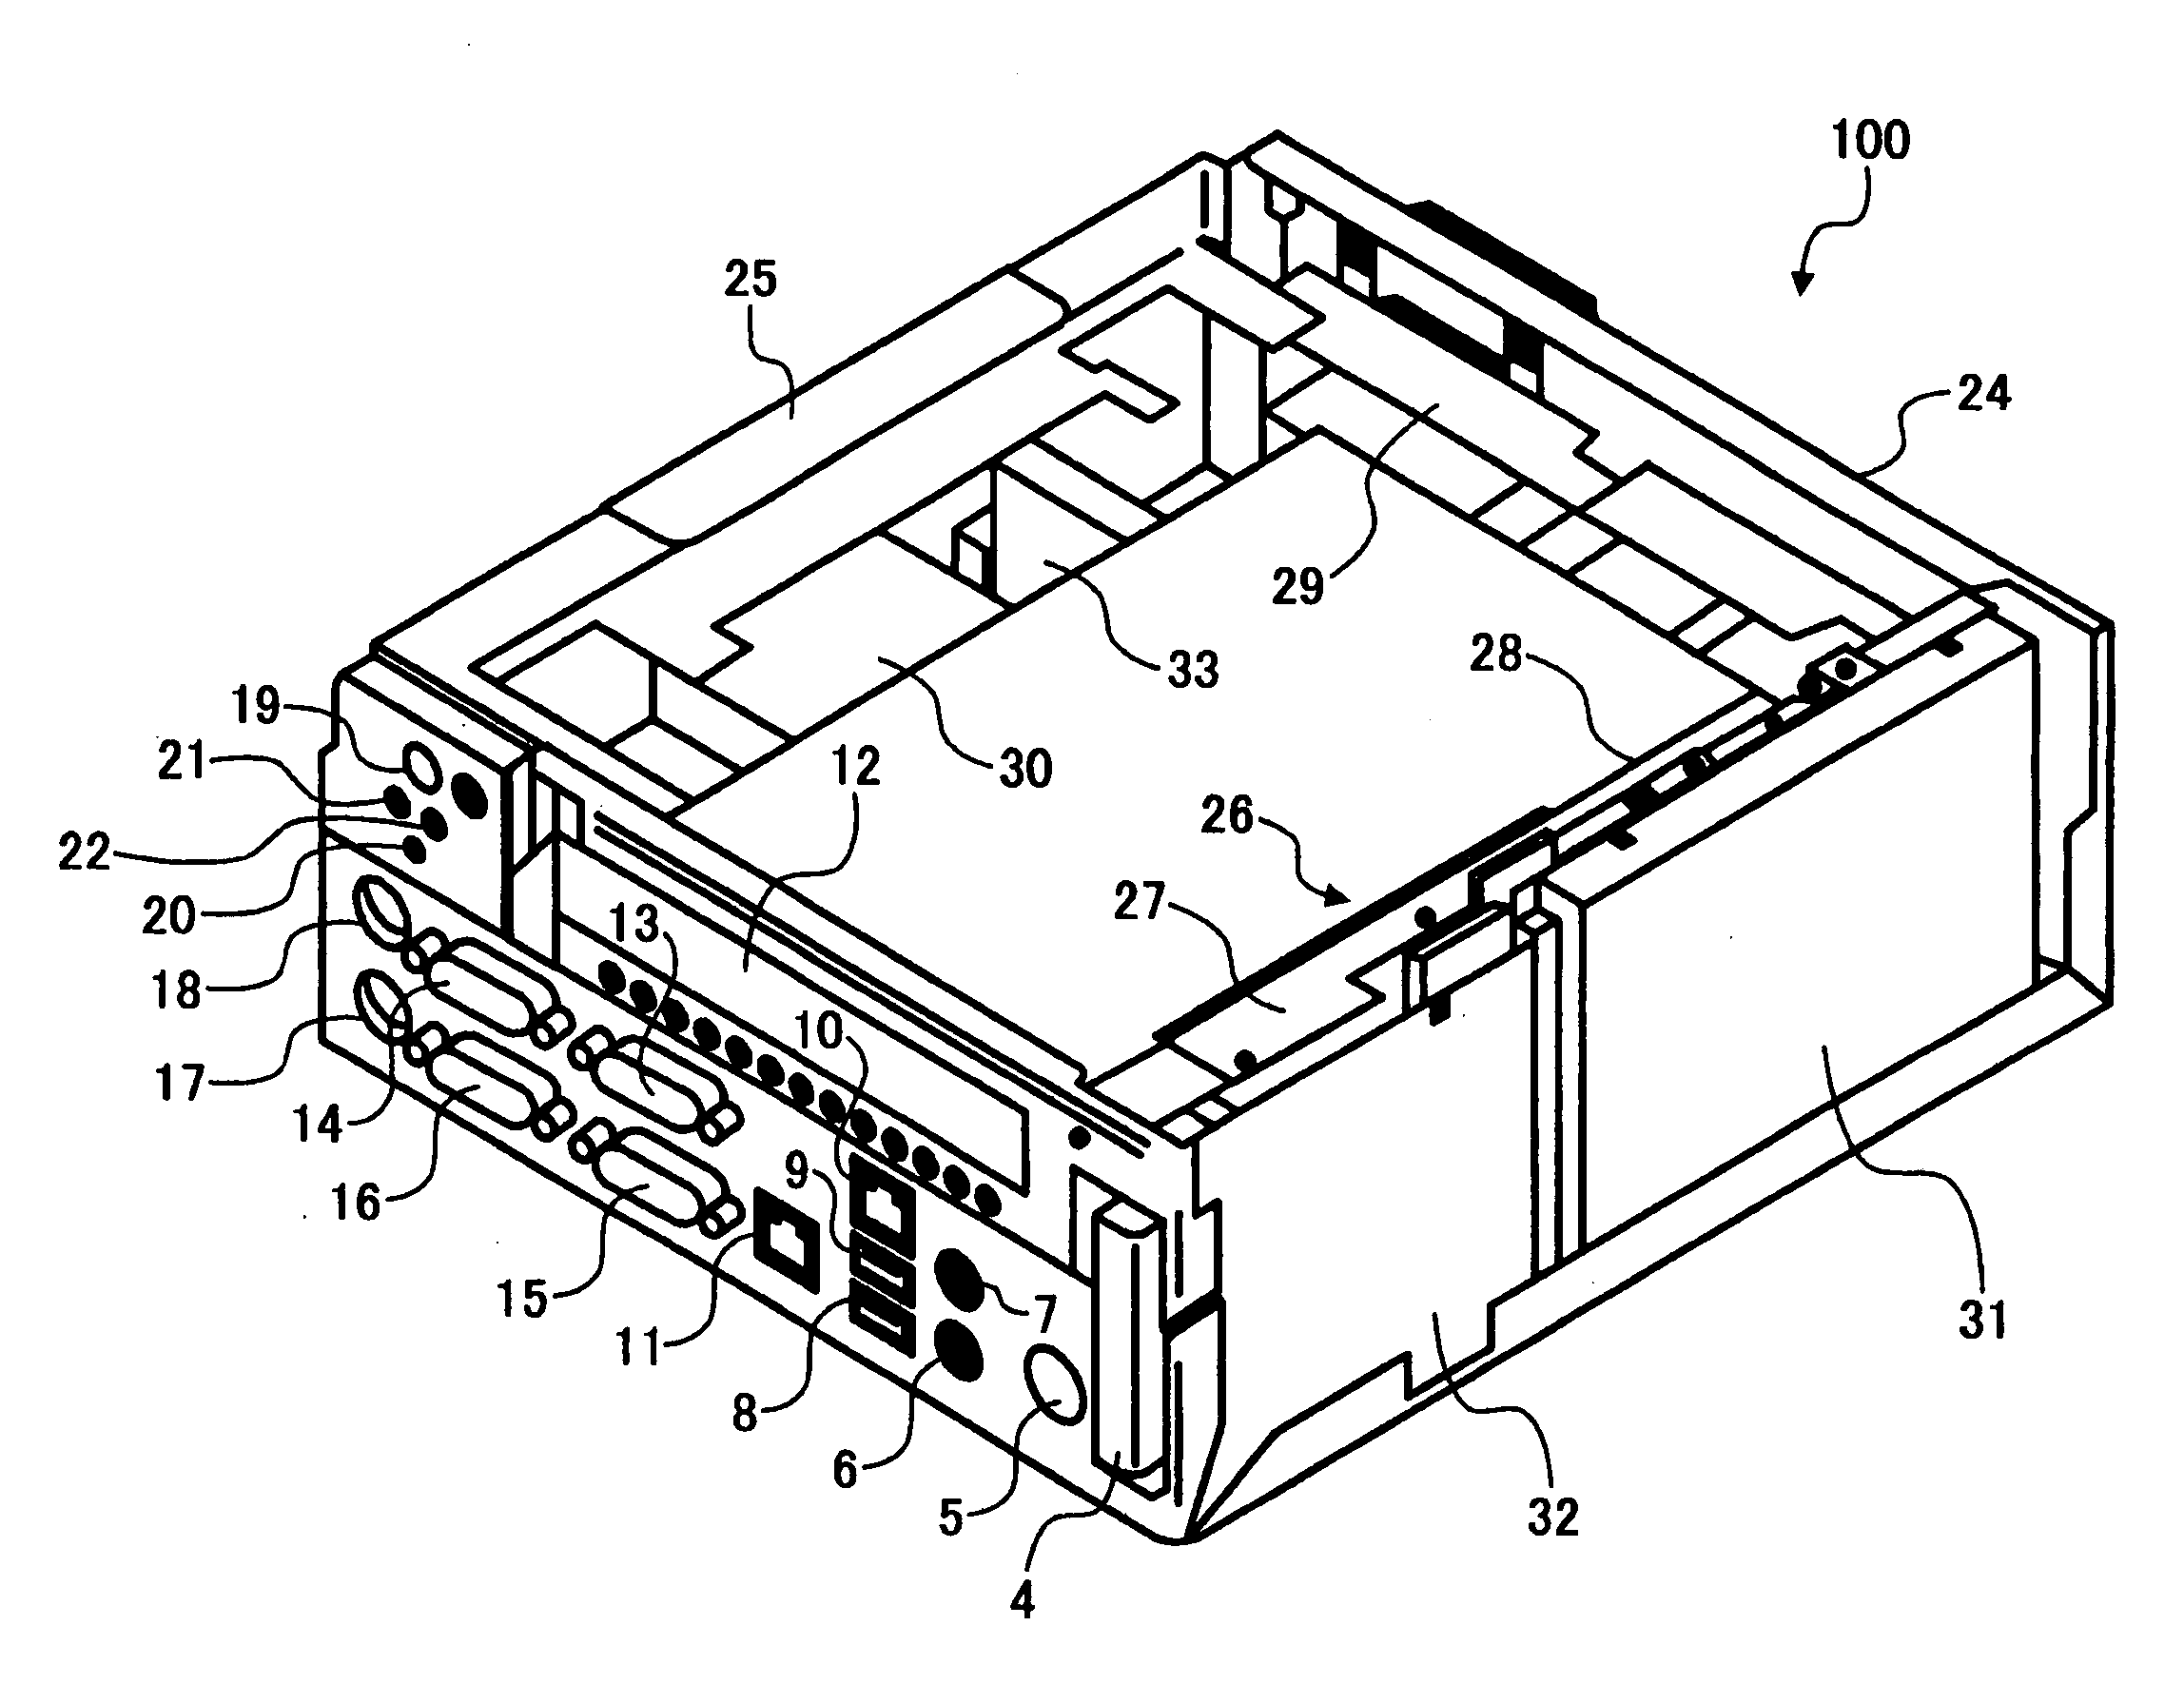 Storage device and method of efficiently arranging components in an information processing apparatus